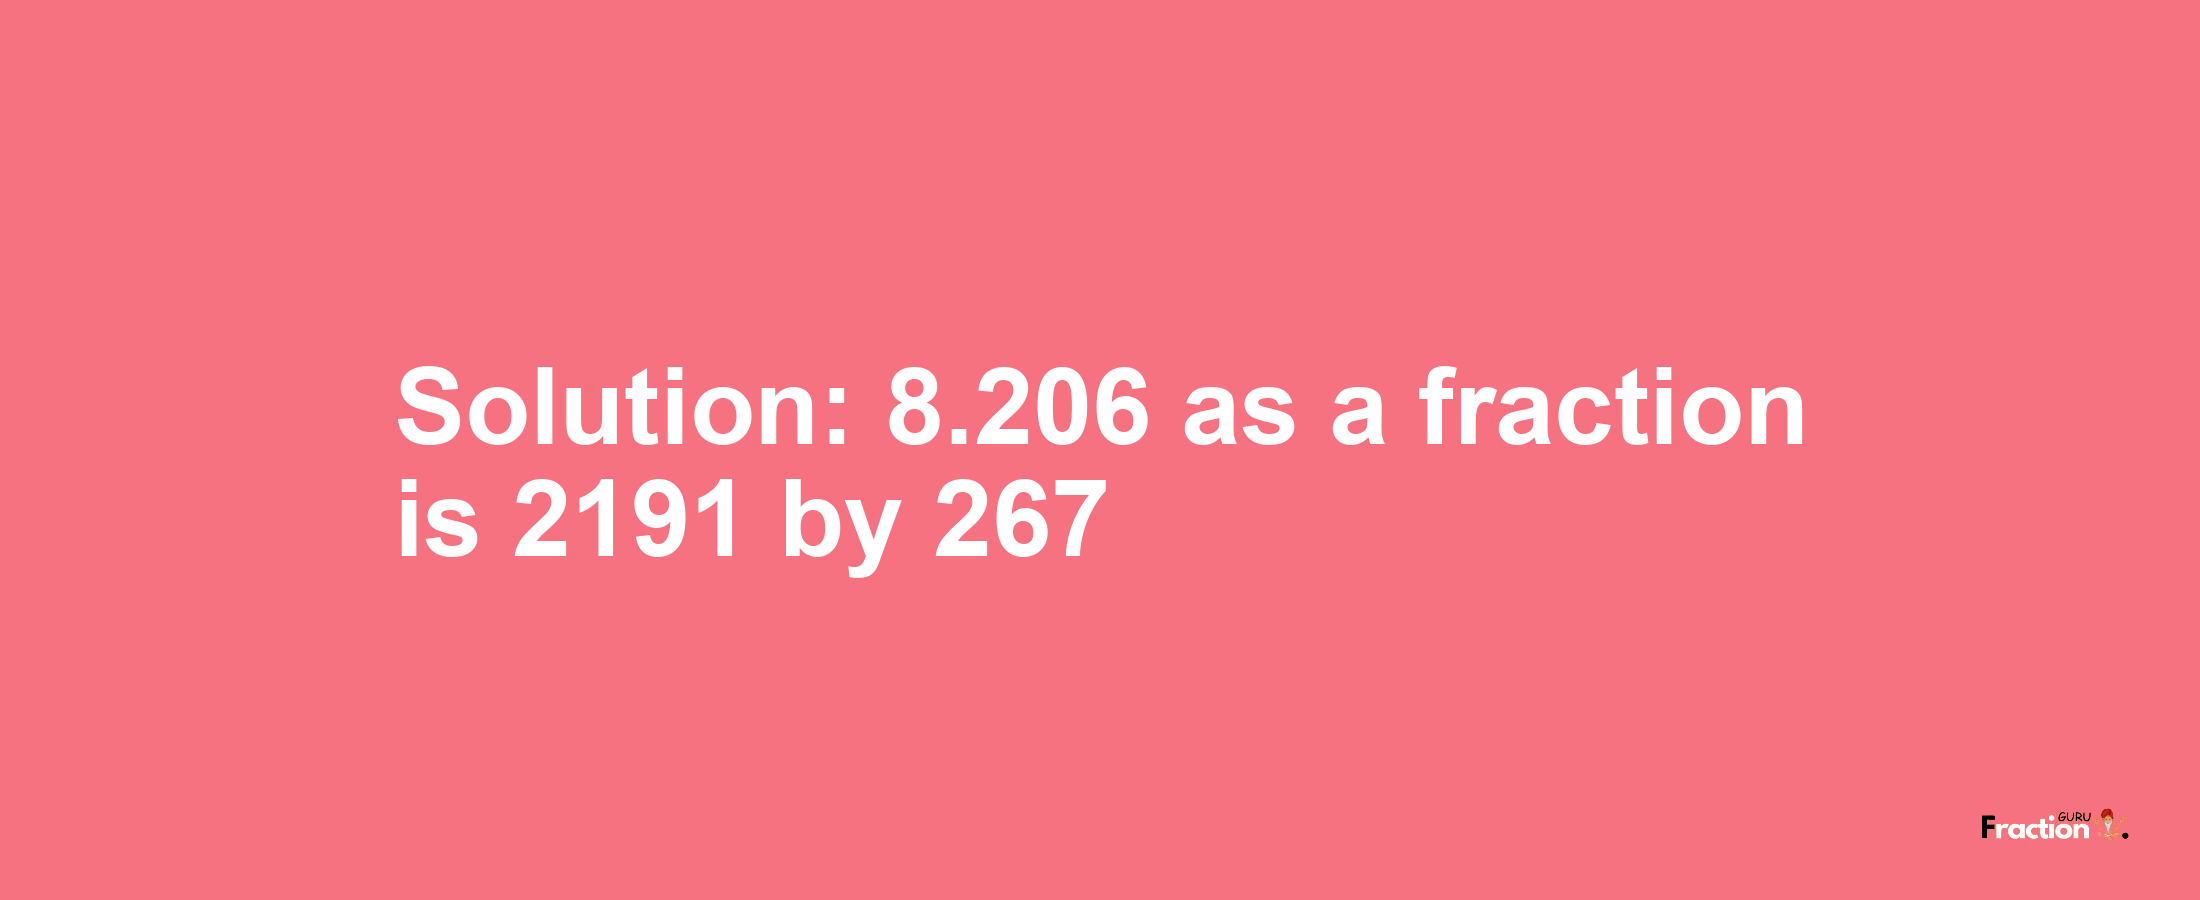 Solution:8.206 as a fraction is 2191/267